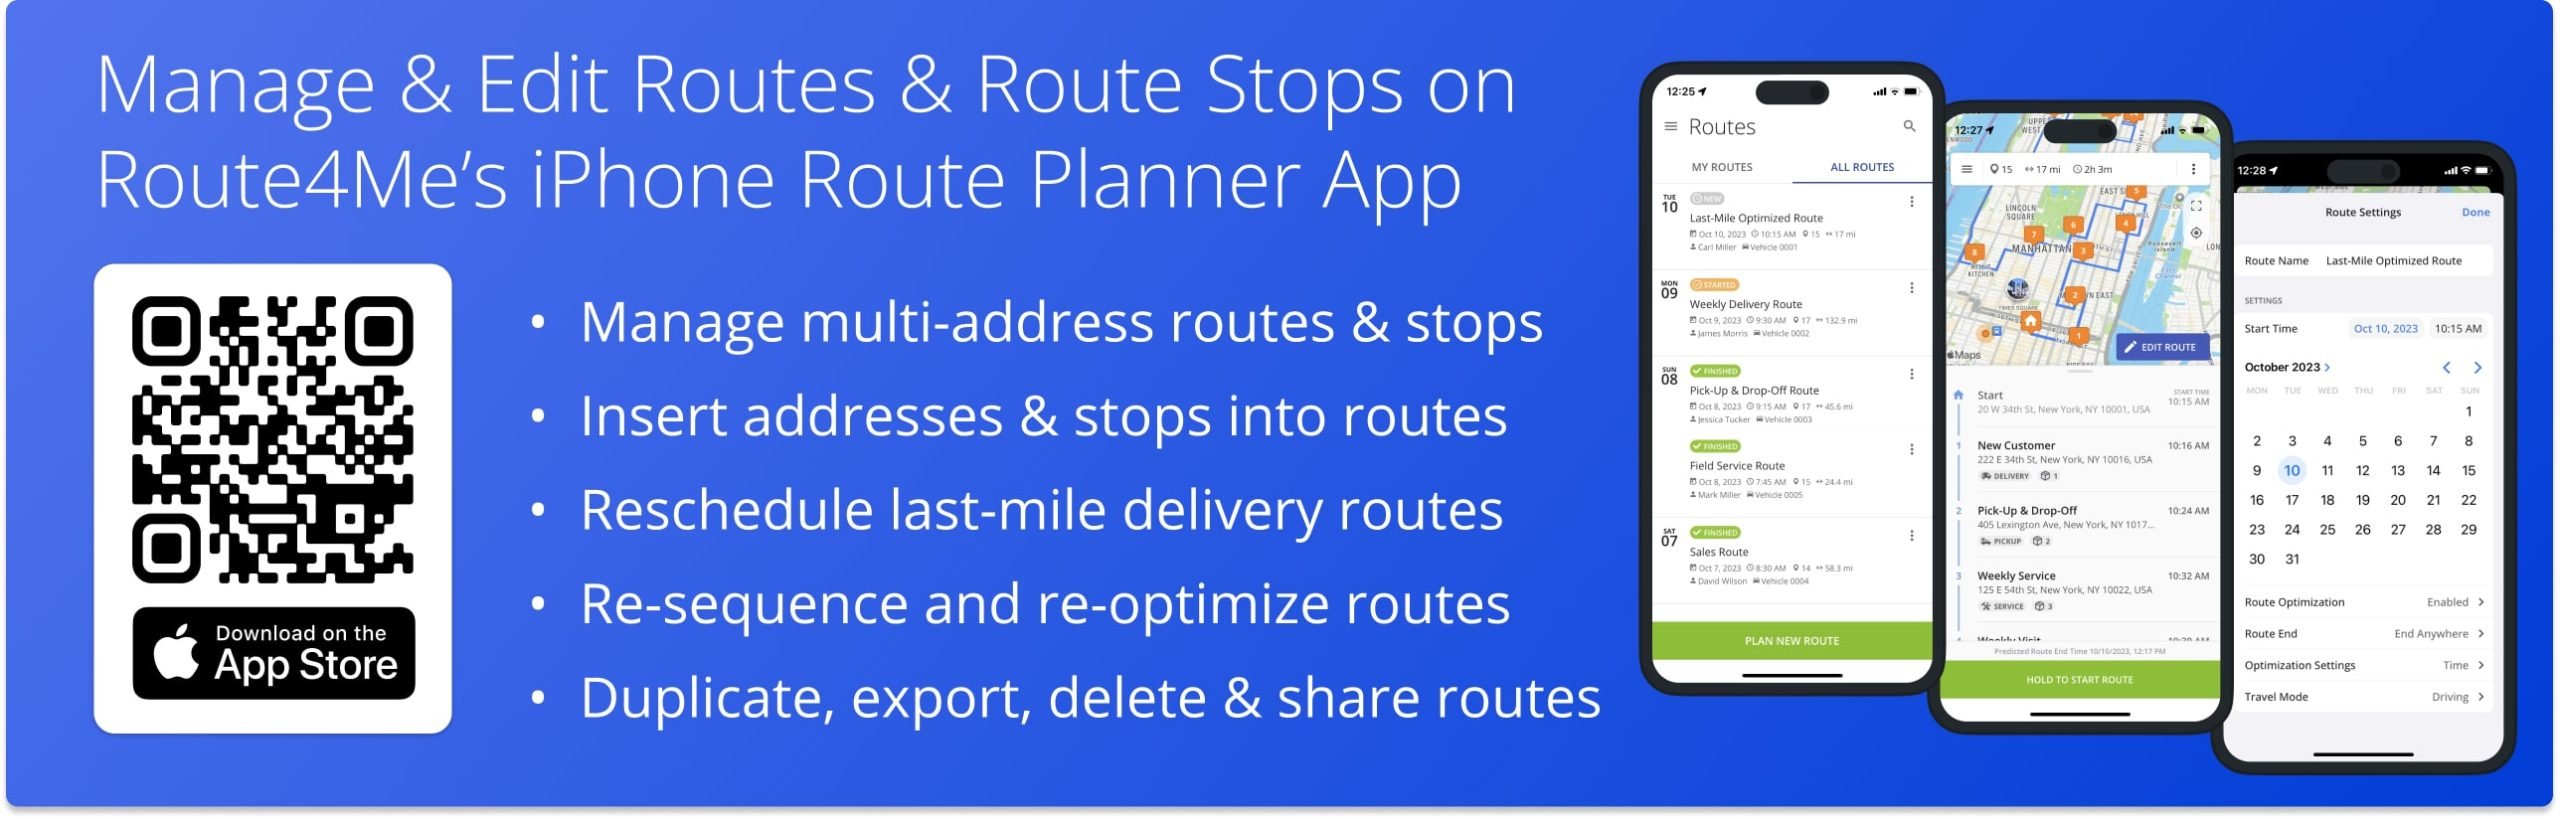 Managing and editing last-mile routes and route stops using Route4Me's iPhone Route Planner app for delivery drivers.